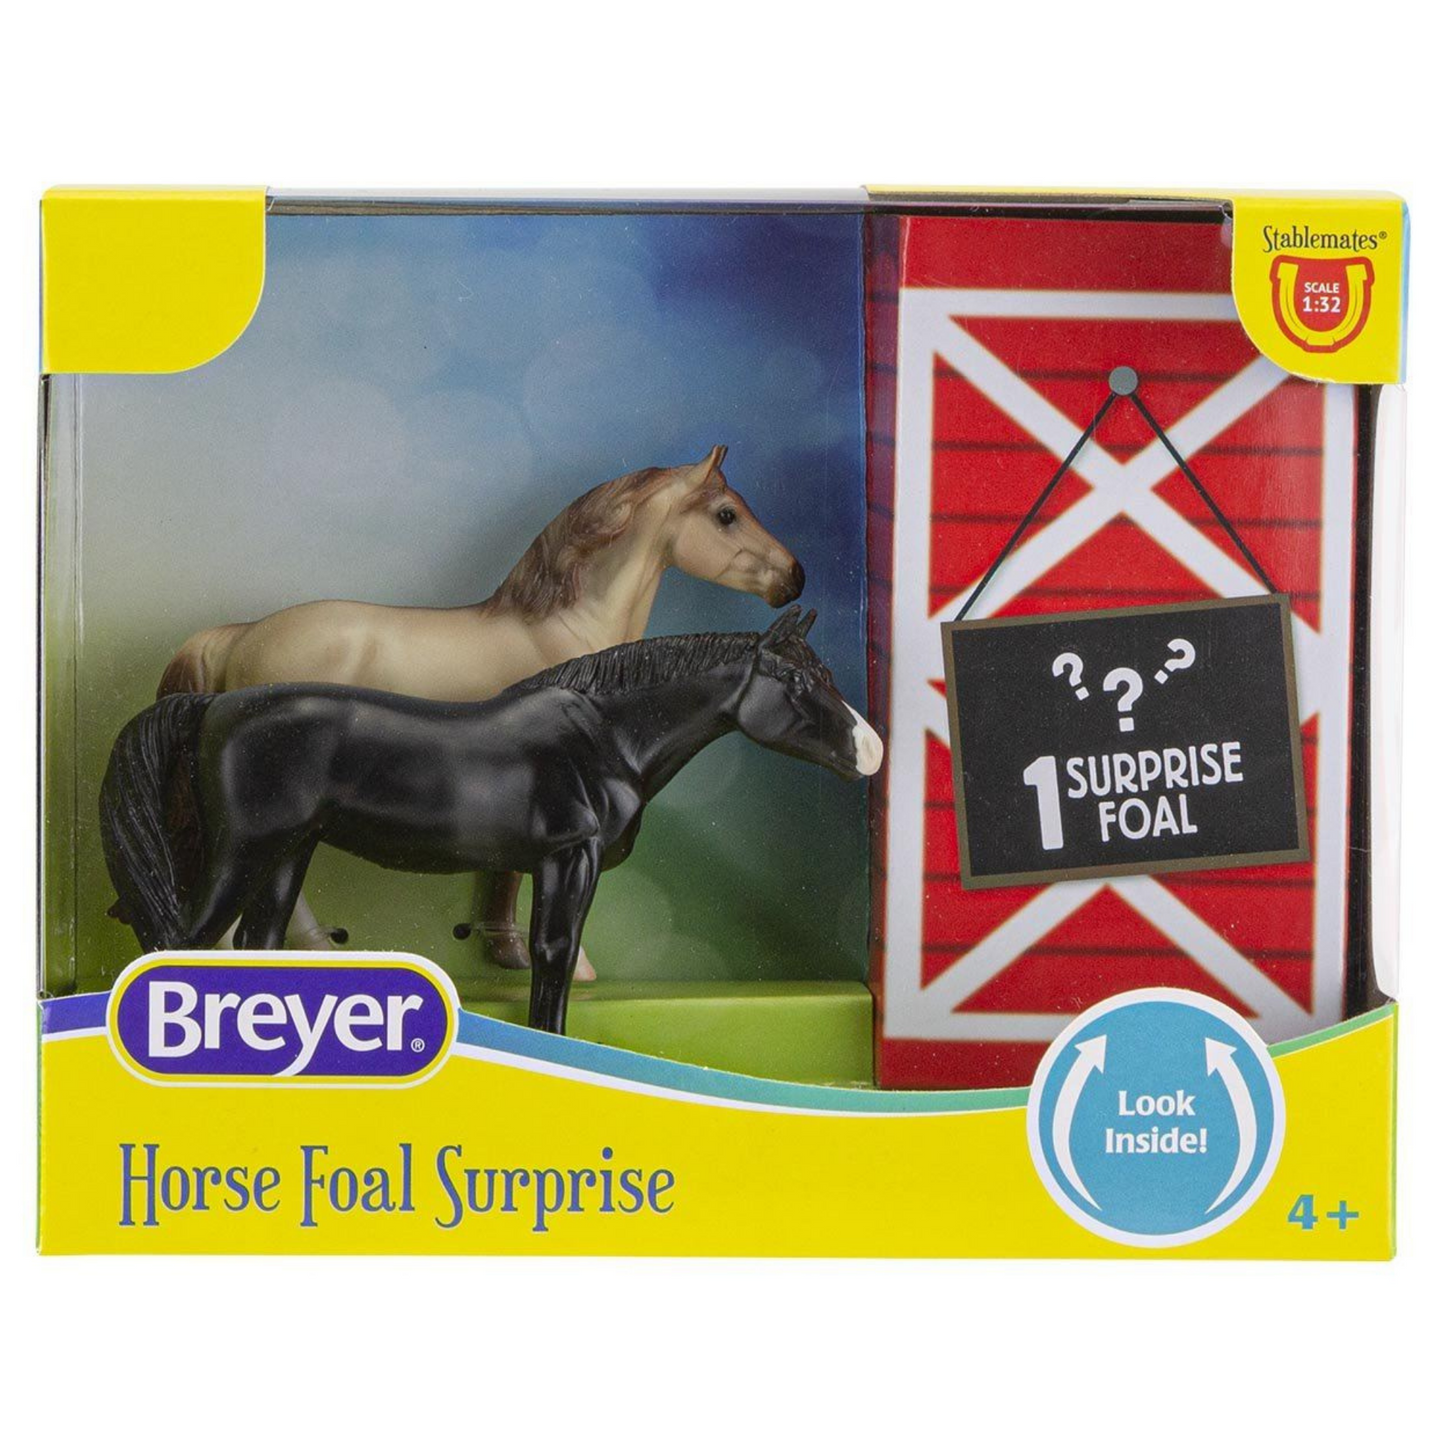 Breyer Stablemates Horse Foal Surprise, 2021